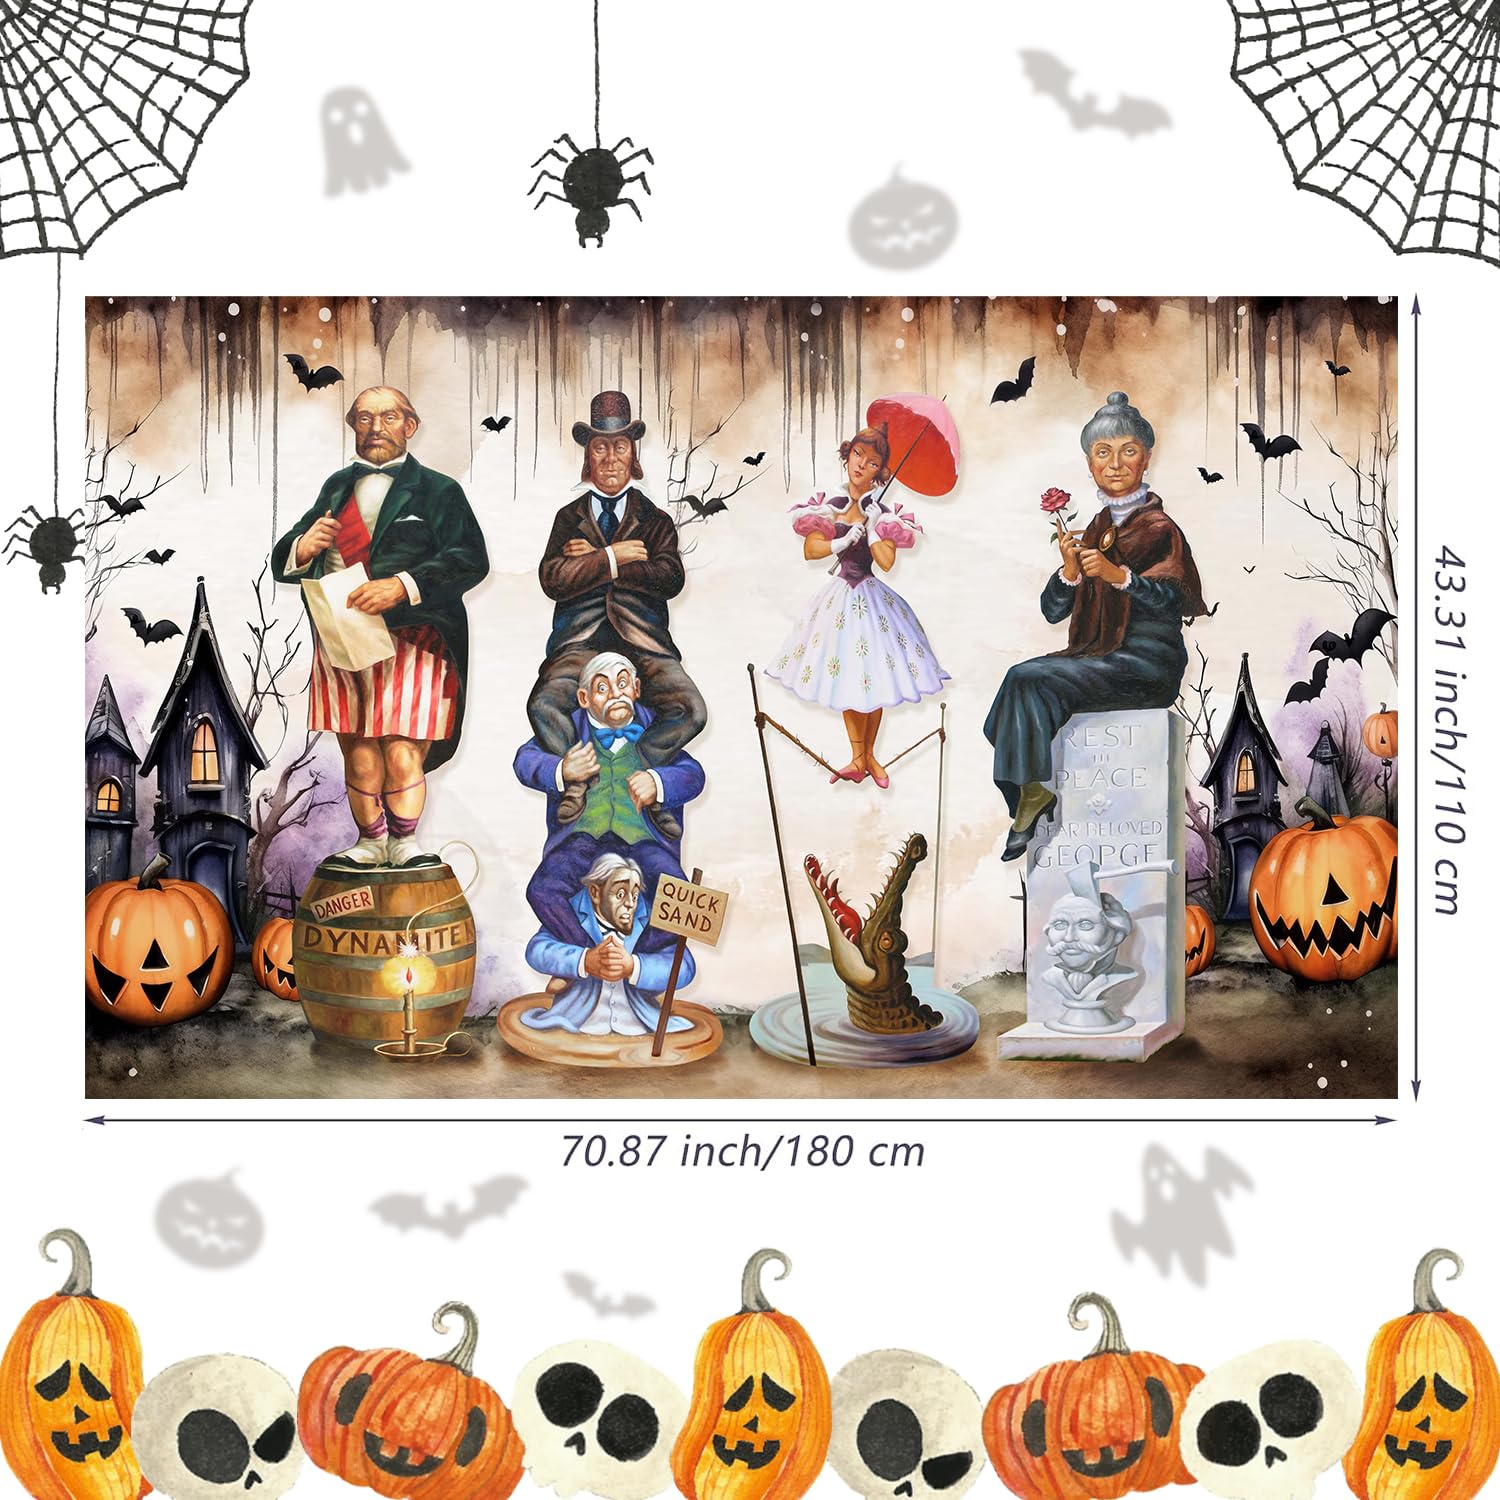 Large Haunted Mansion Portraits Banner Halloween Decoration,Vintage Horror Poster Halloween Party Photo Booth Props Wall Decor Inside Outdoor Halloween Decorations 5.9x3.6